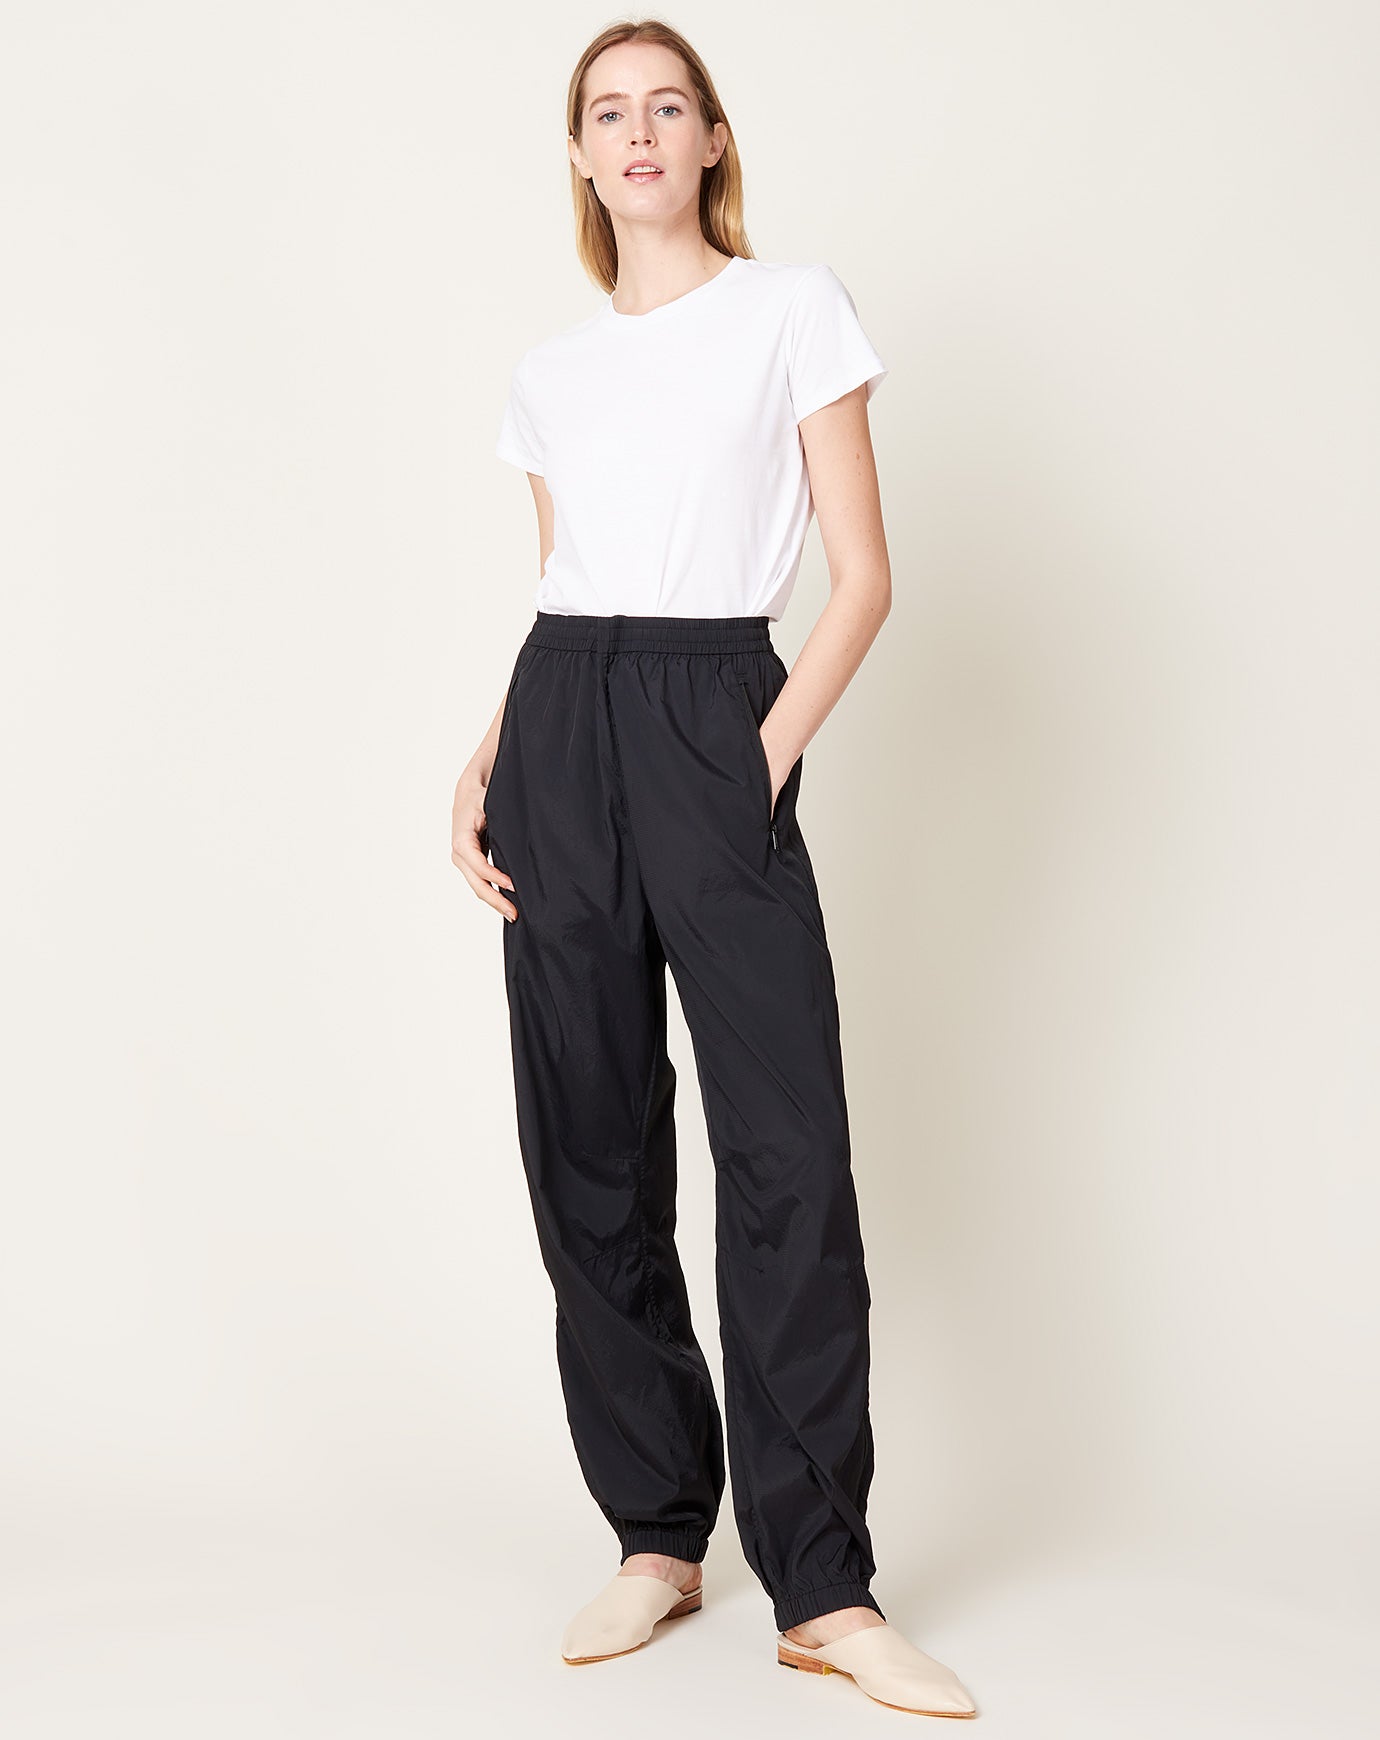 6397 Packable Warm Up Pant in Black